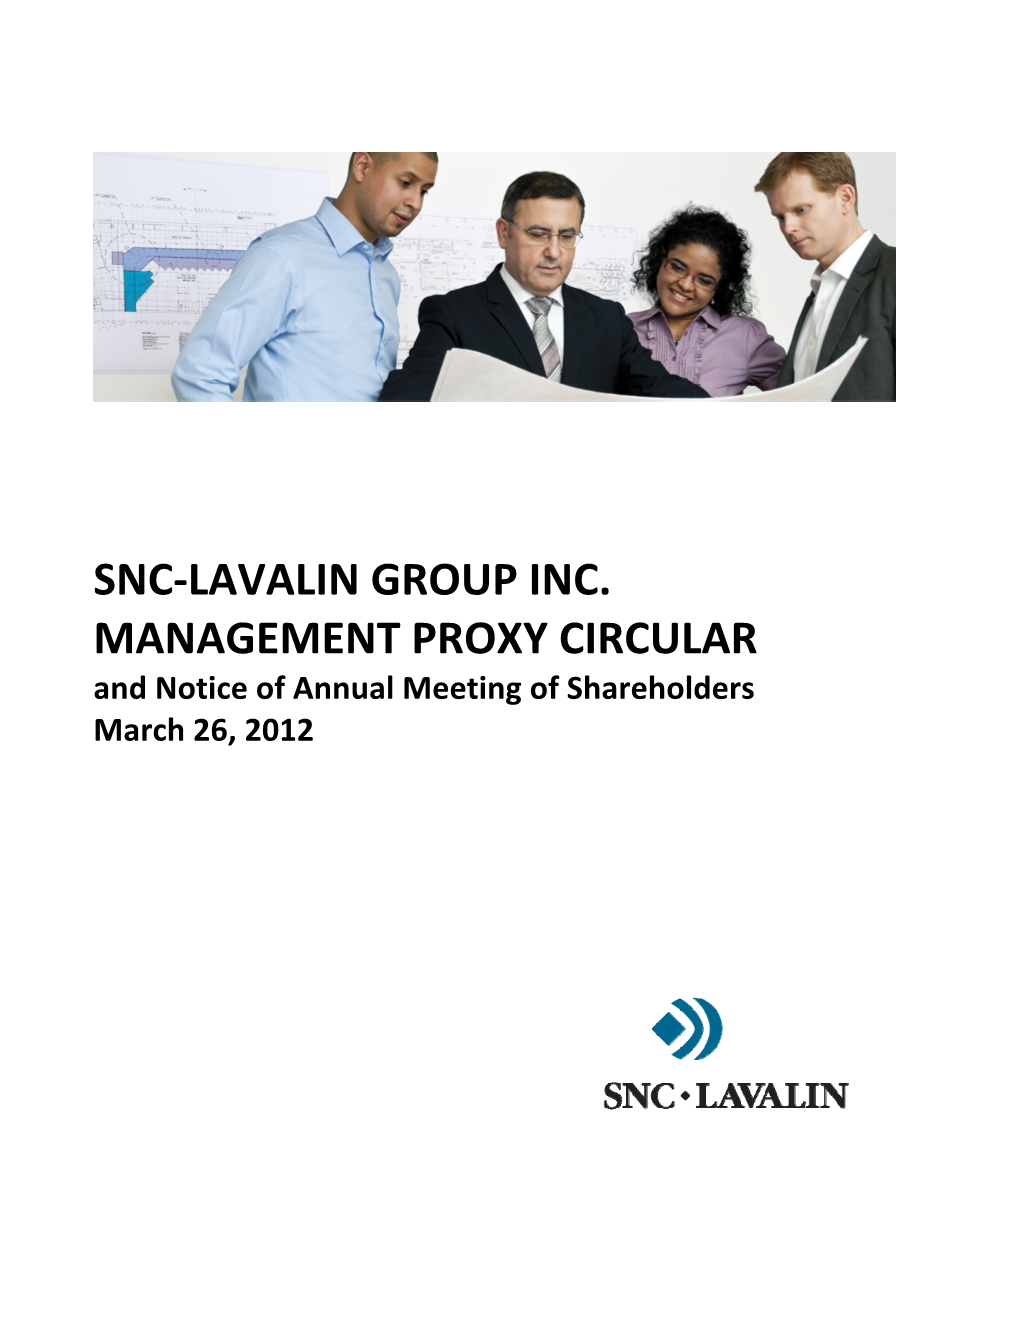 SNC-LAVALIN GROUP INC. MANAGEMENT PROXY CIRCULAR and Notice of Annual Meeting of Shareholders March 26, 2012